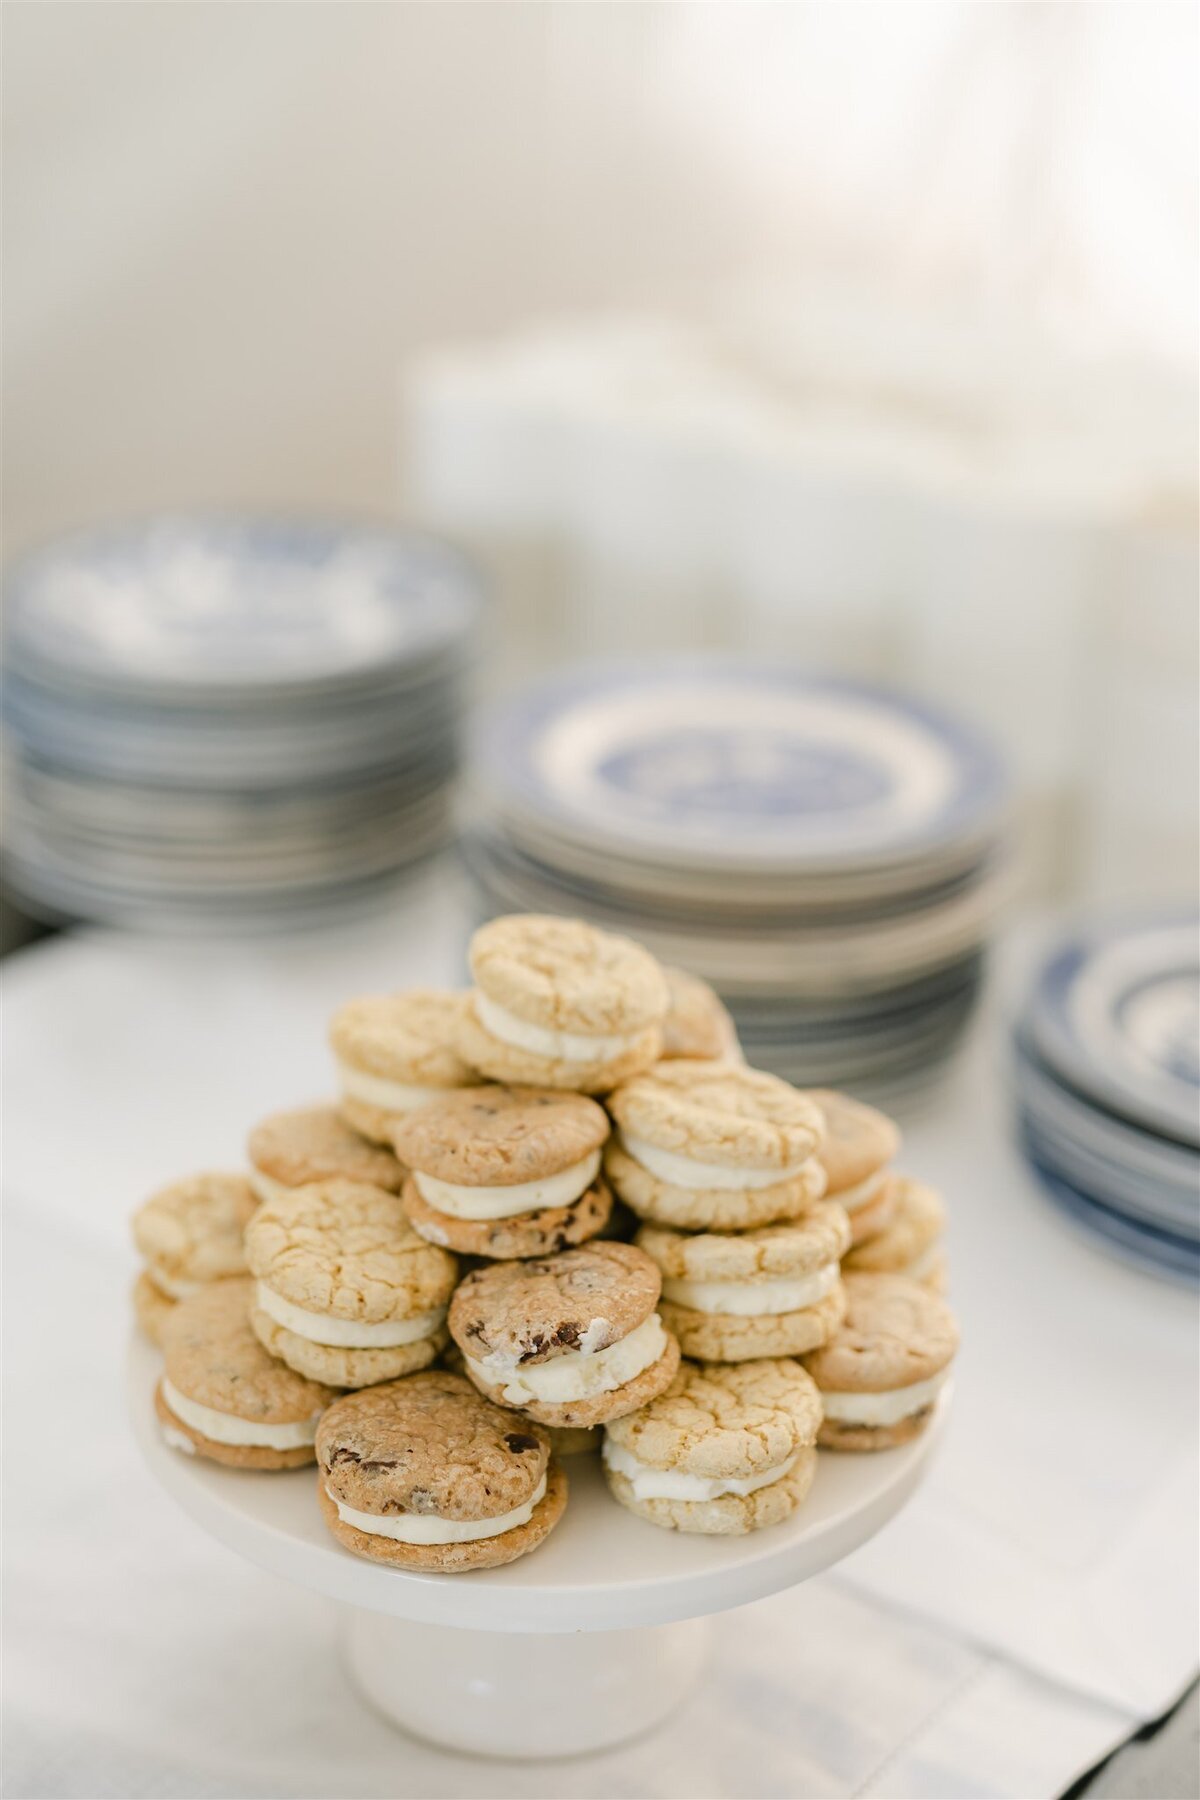 7-Blue and White Ginger Jar Inspired Wedding Desserts-Oak Hill Country Club Wedding-Verve Event Co (3)